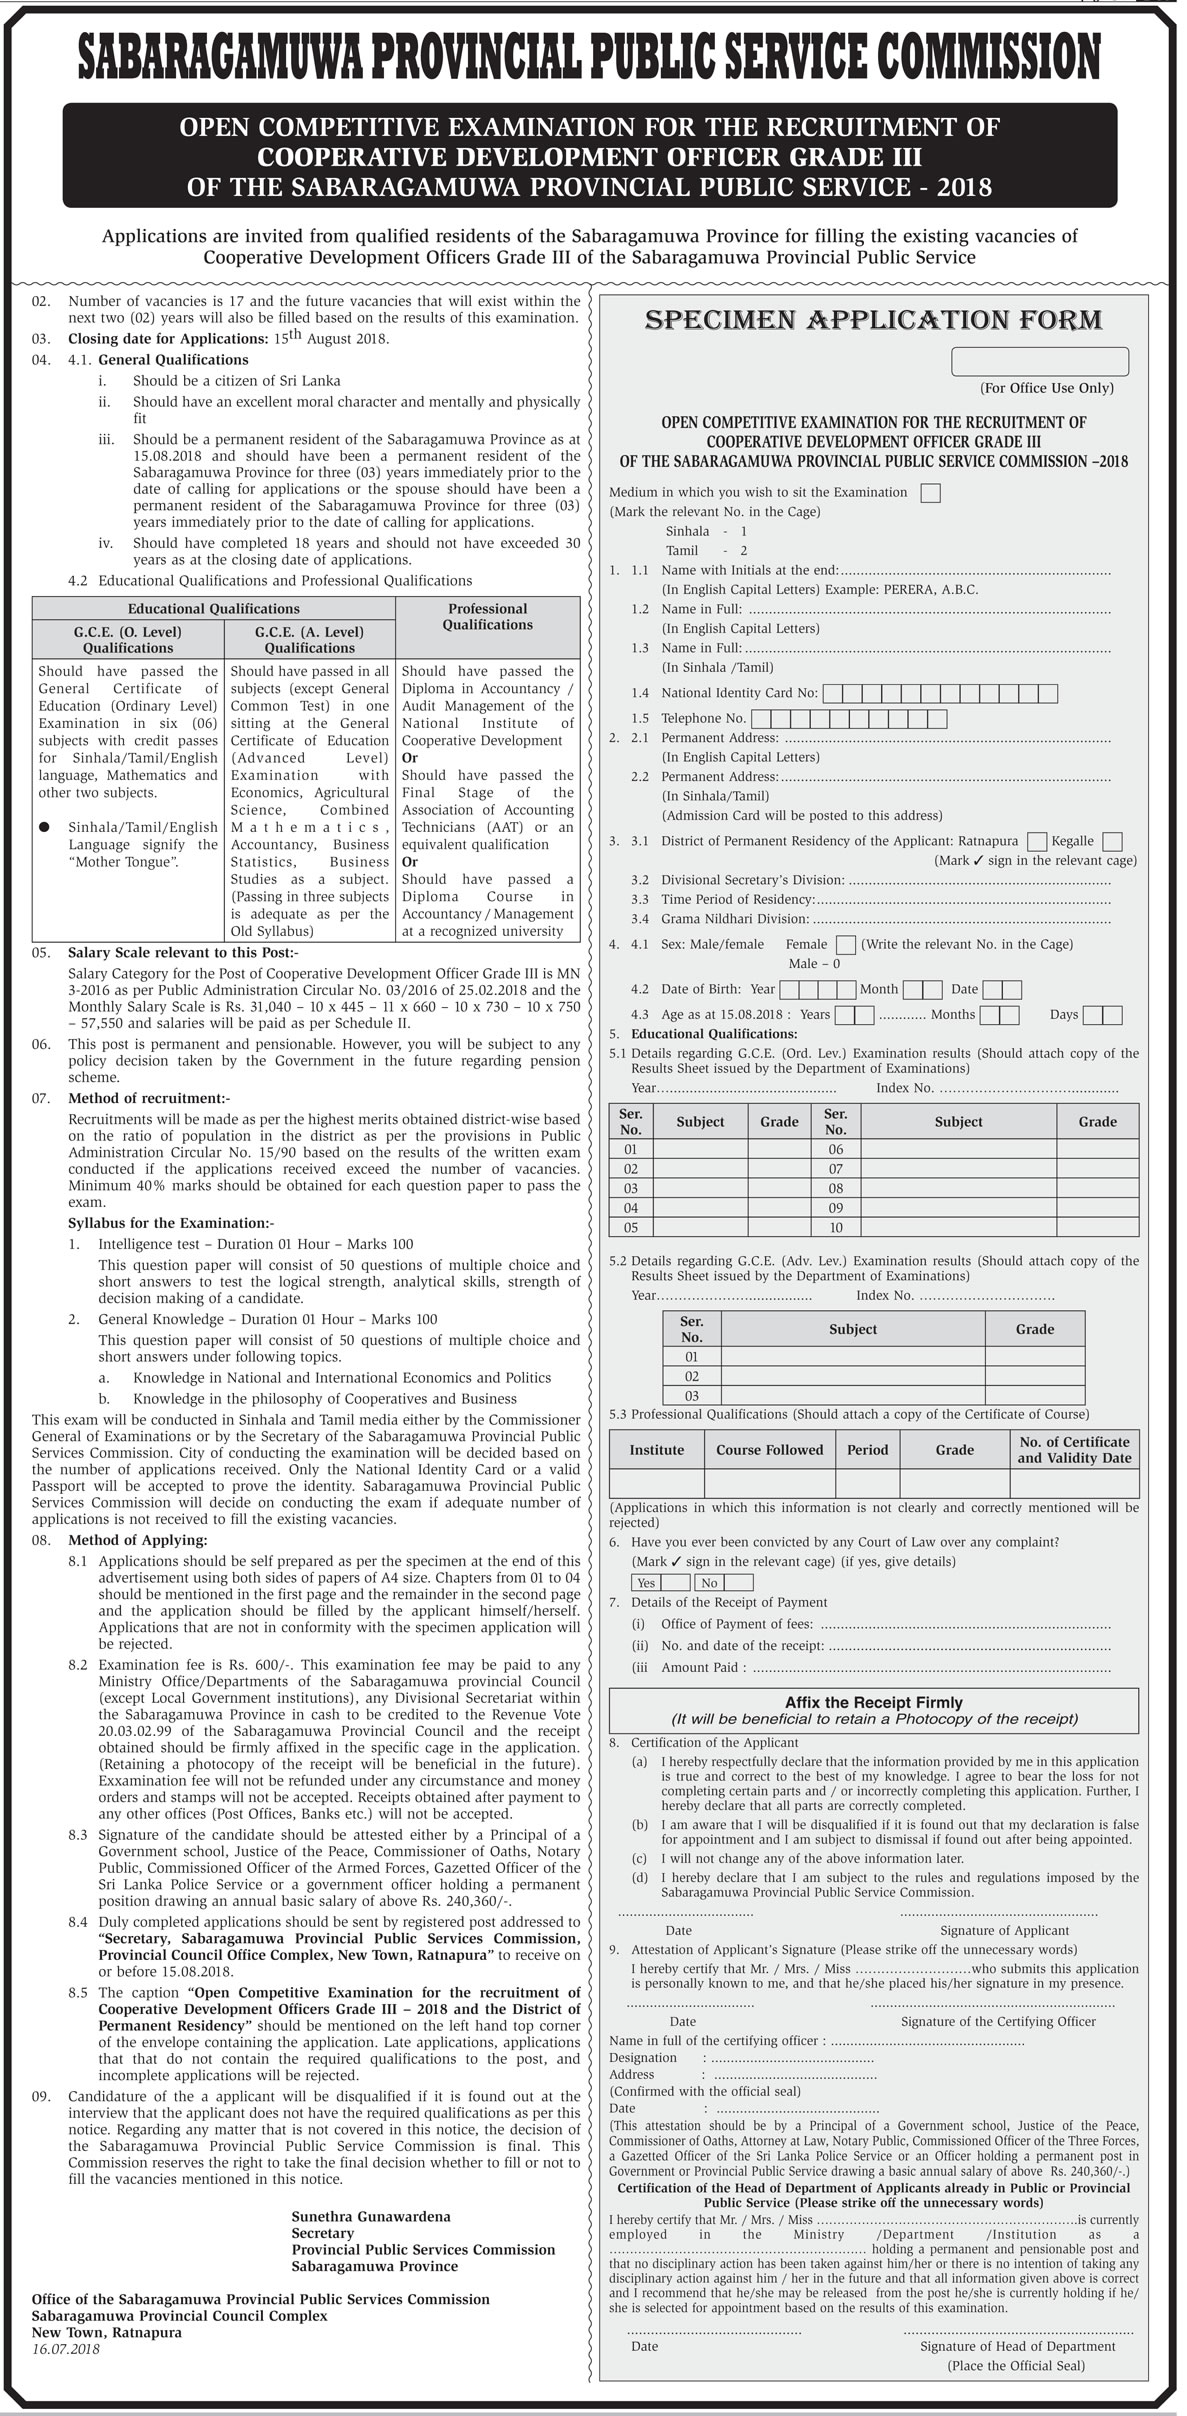 Open Competitive Examination for Recruitment of Cooperative Development Officer (Grade III) – Sabaragamuwa Provincial Public Service Commission Jobs Vacancies Application